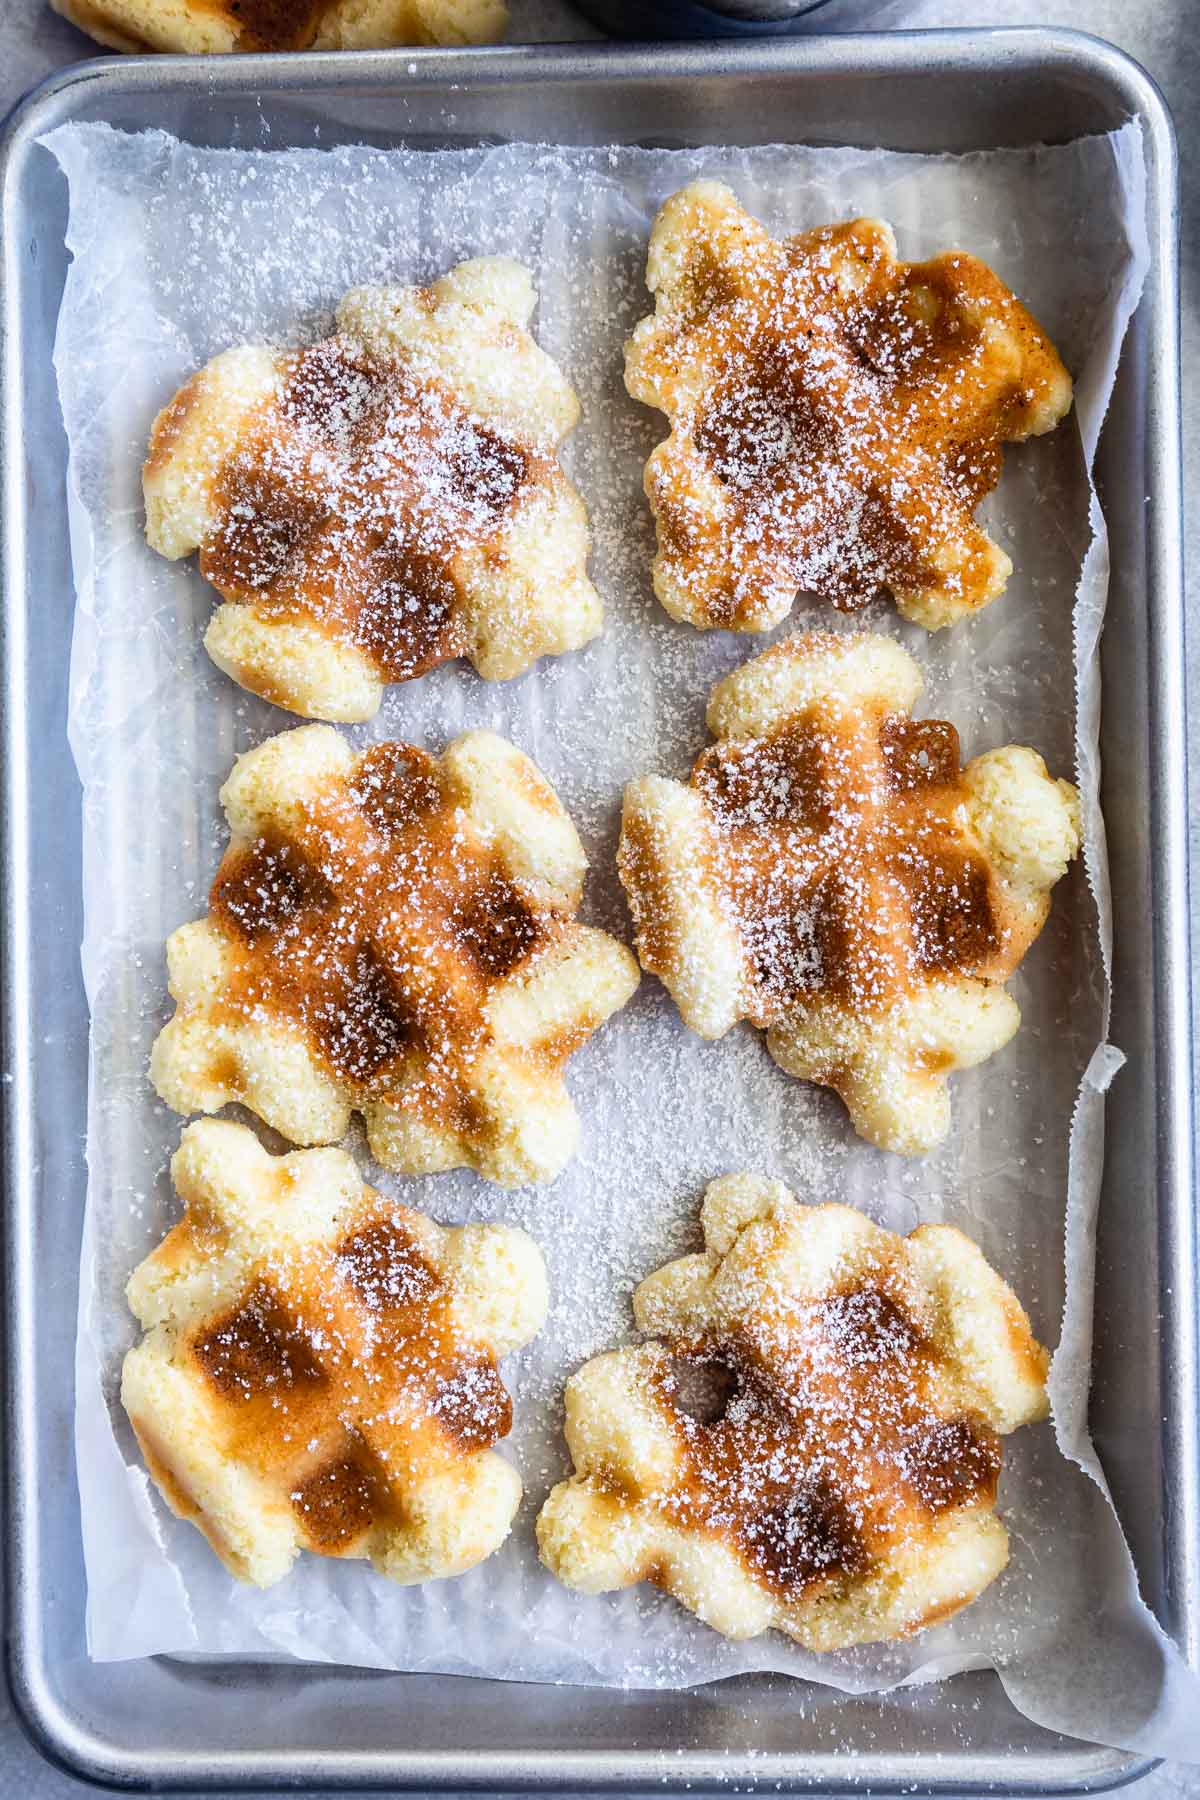 Overhead view of six waffle cookies sprinkled with powdered sugar on a baking sheet